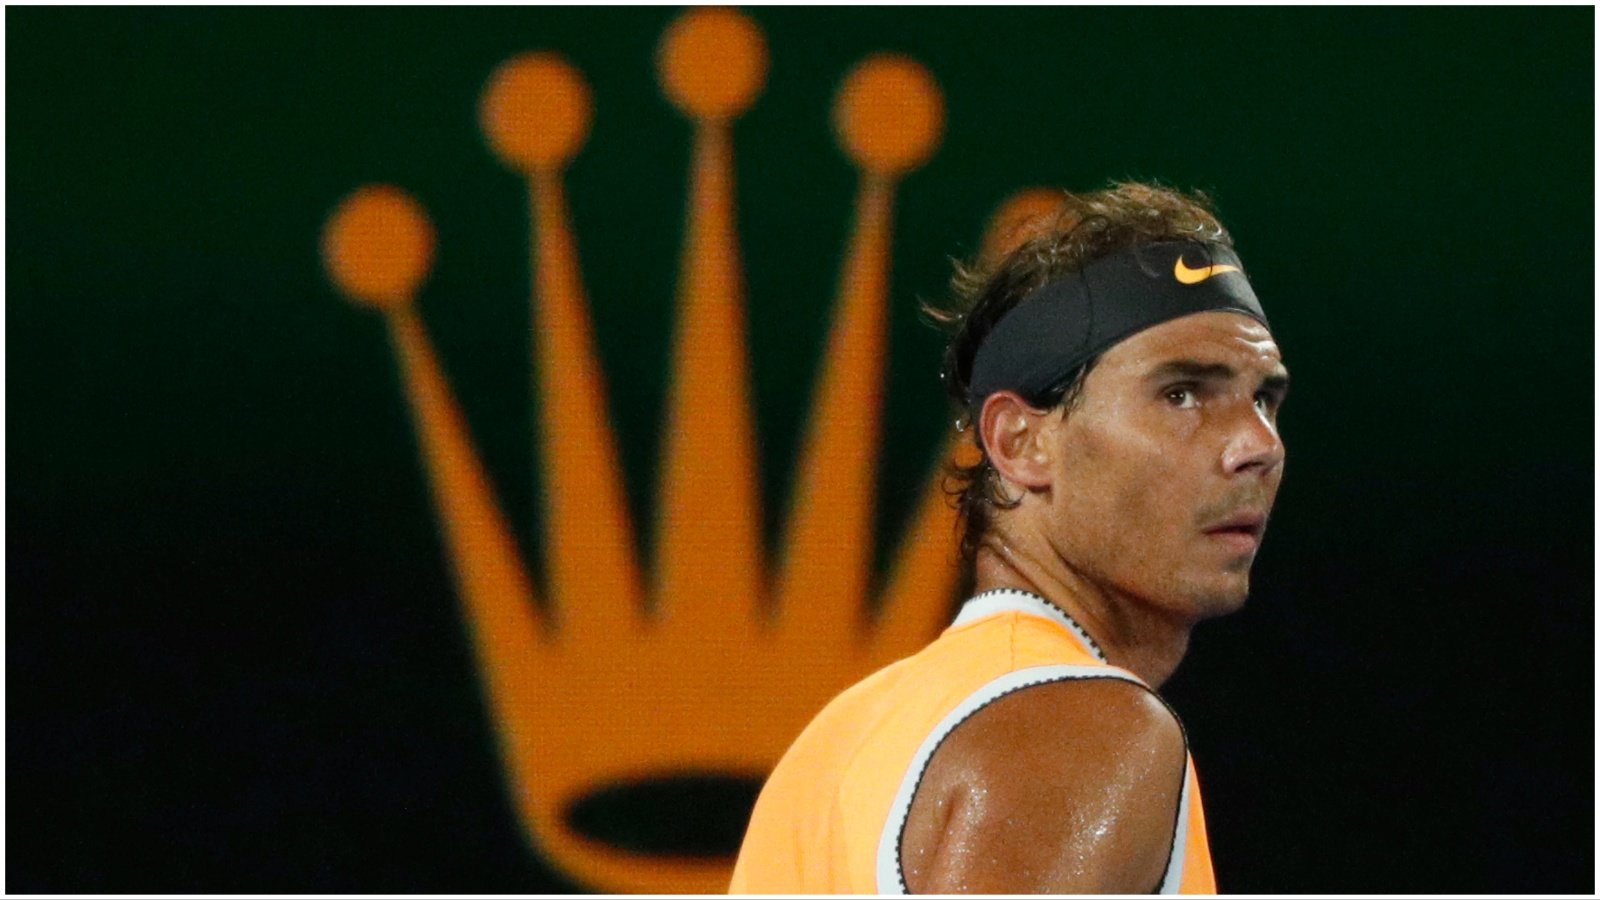 Rafael Nadal returns to tennis after being out for a year